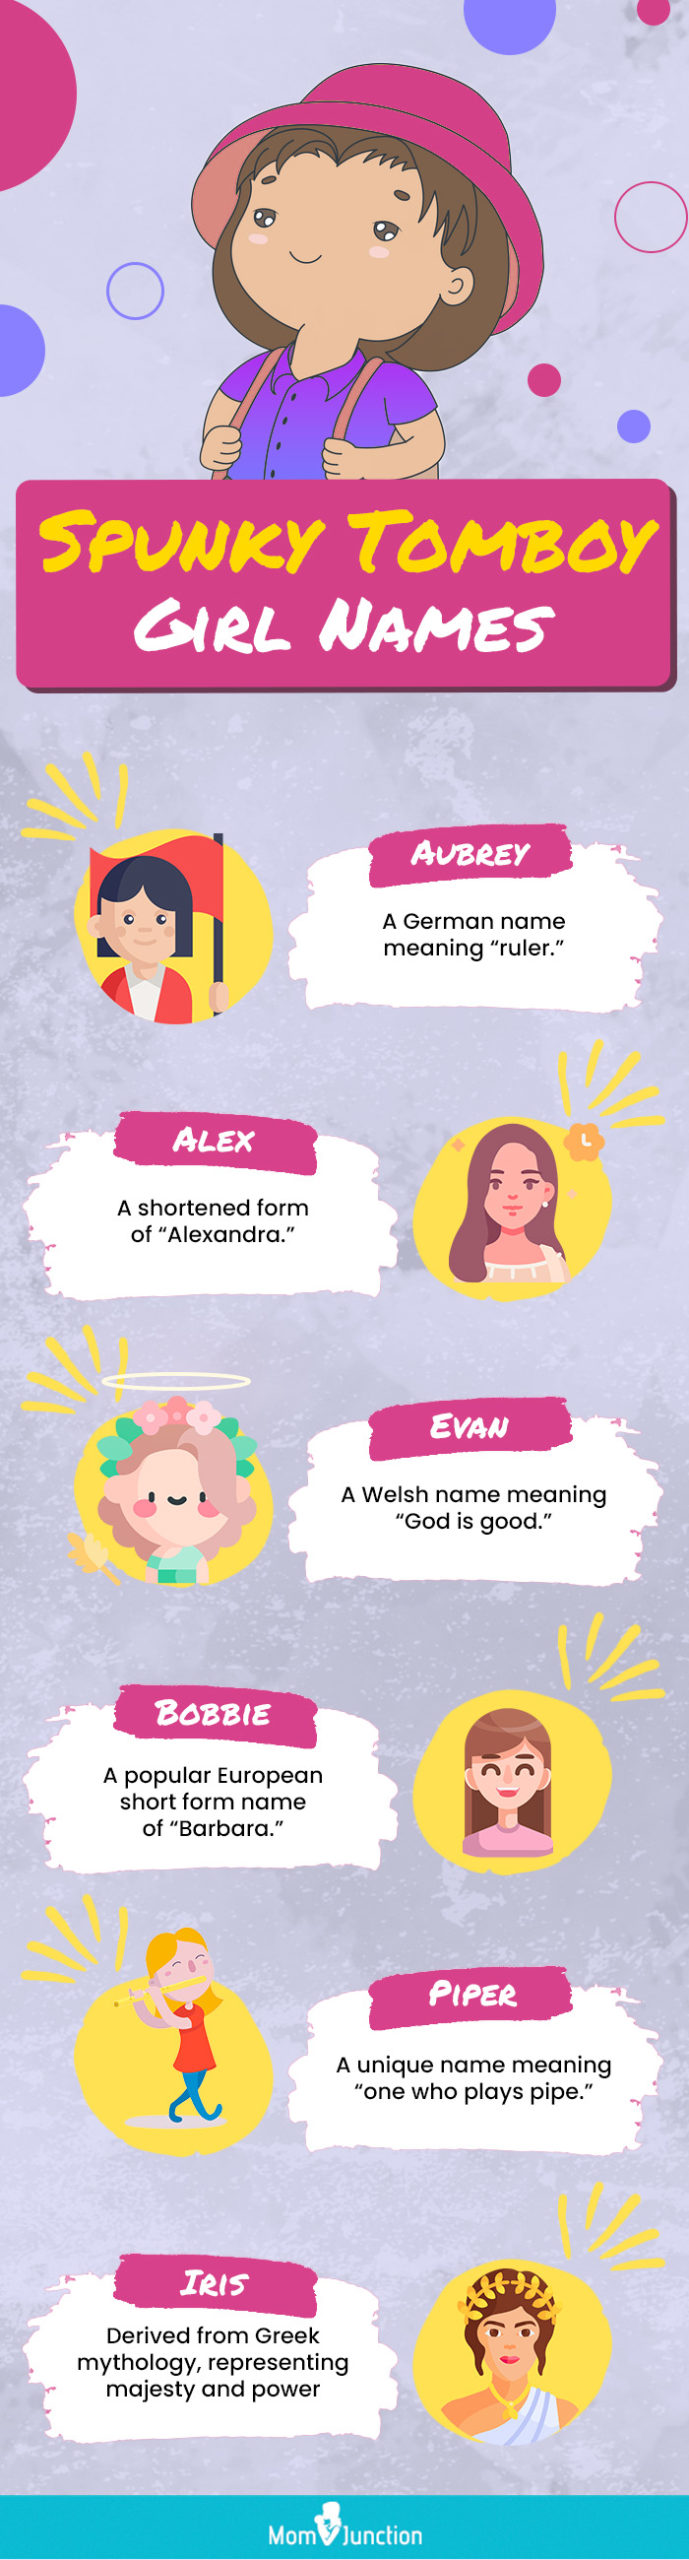 tomboy names for your baby girl (infographic)